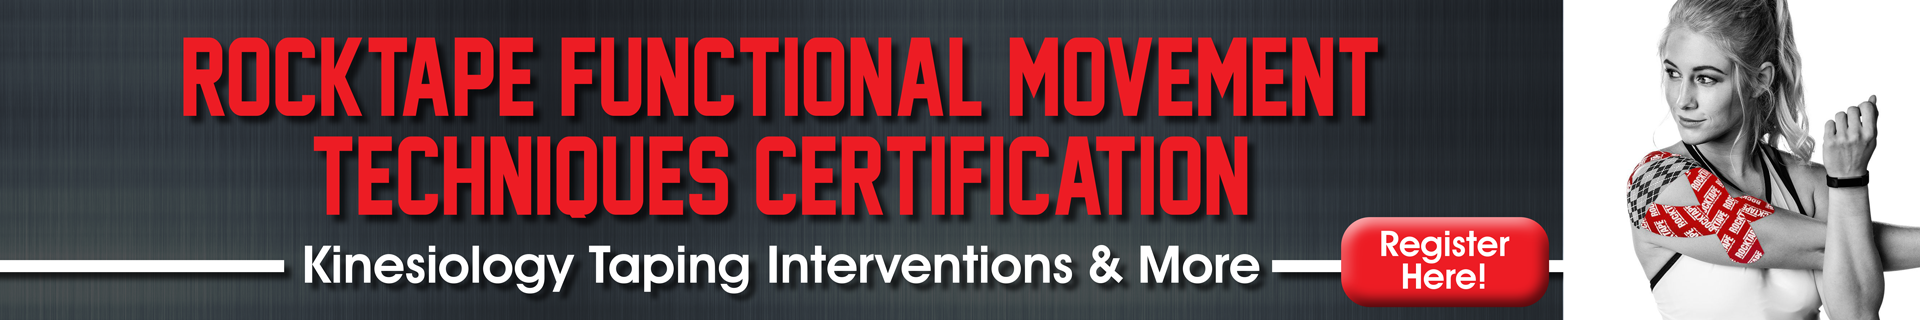 RockTape Functional Movement Techniques Certification: Kinesiology Taping Interventions & More